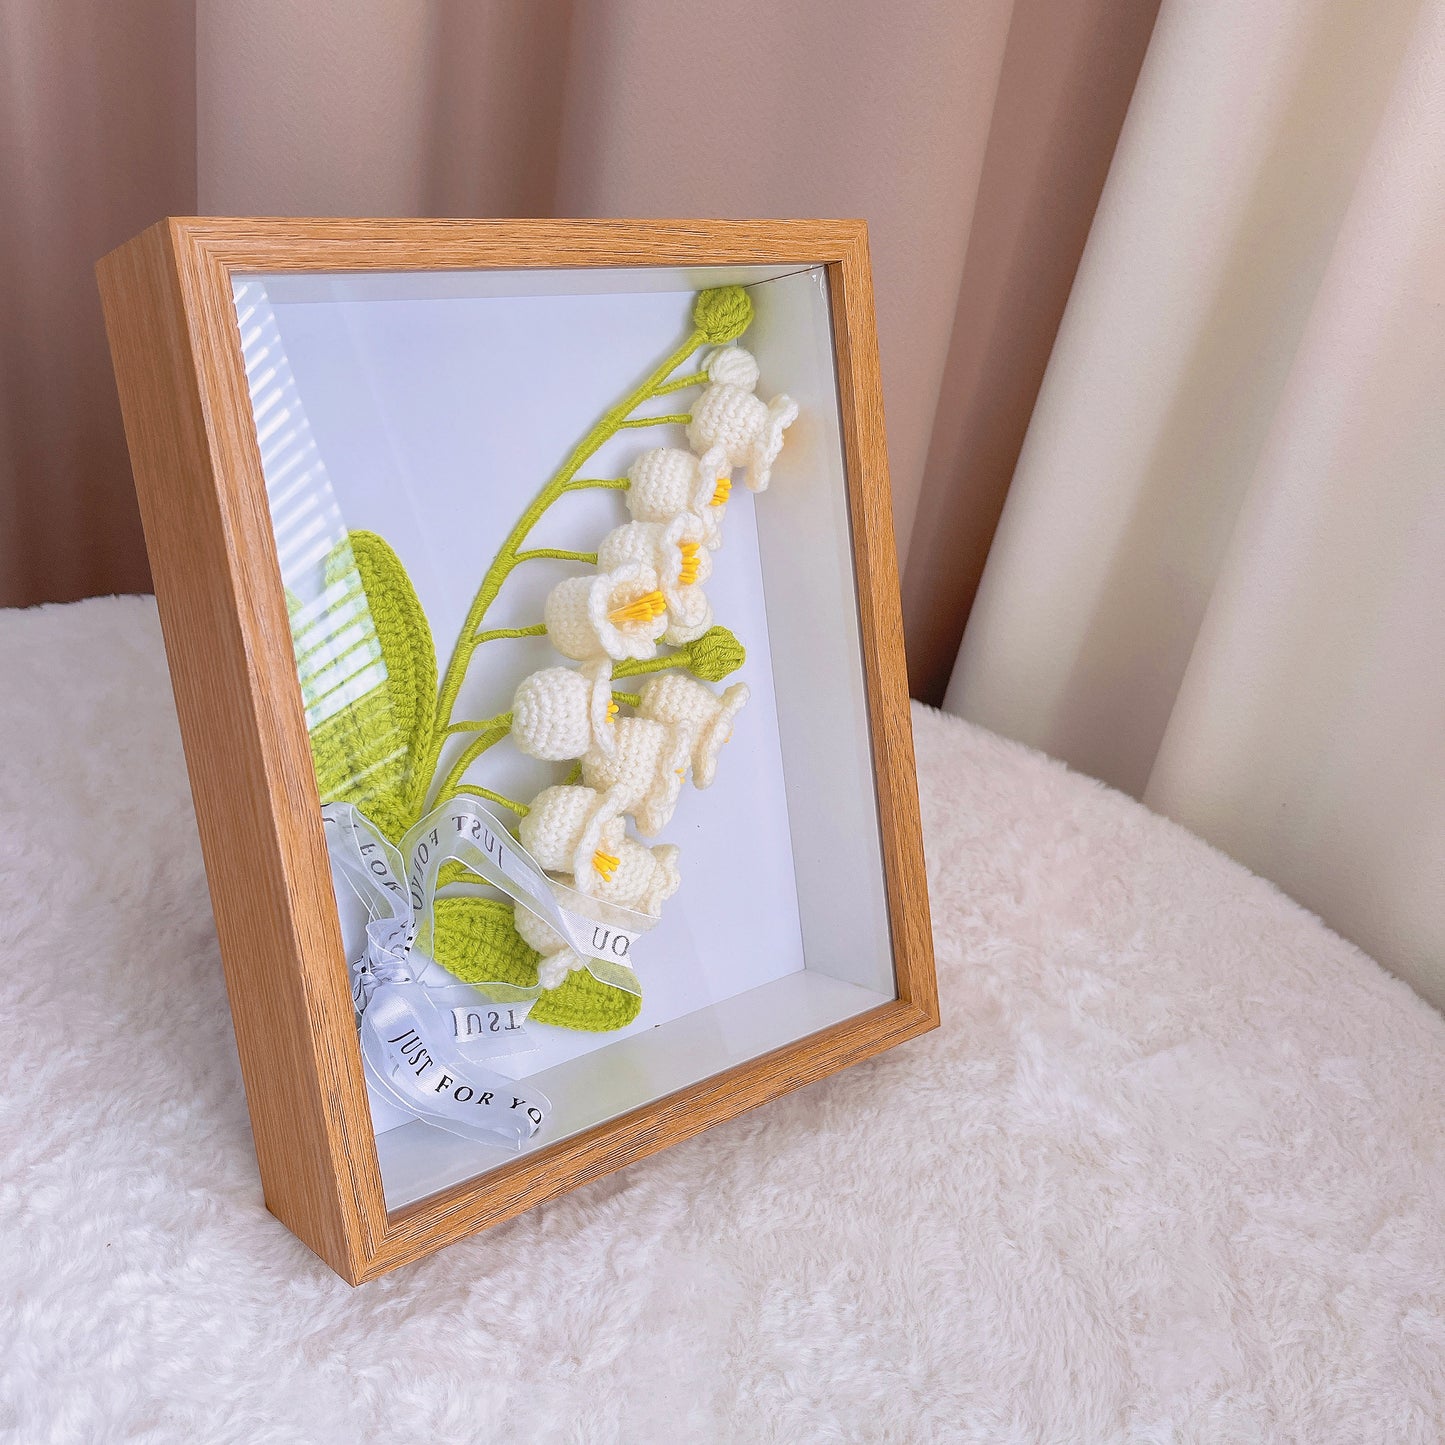 Handmade Lily of the Valley Crochet in Photo Frame - Wooden Wall Decor, Tabletop Display, Unique Wedding Gift, Anniversary, Mother's Day